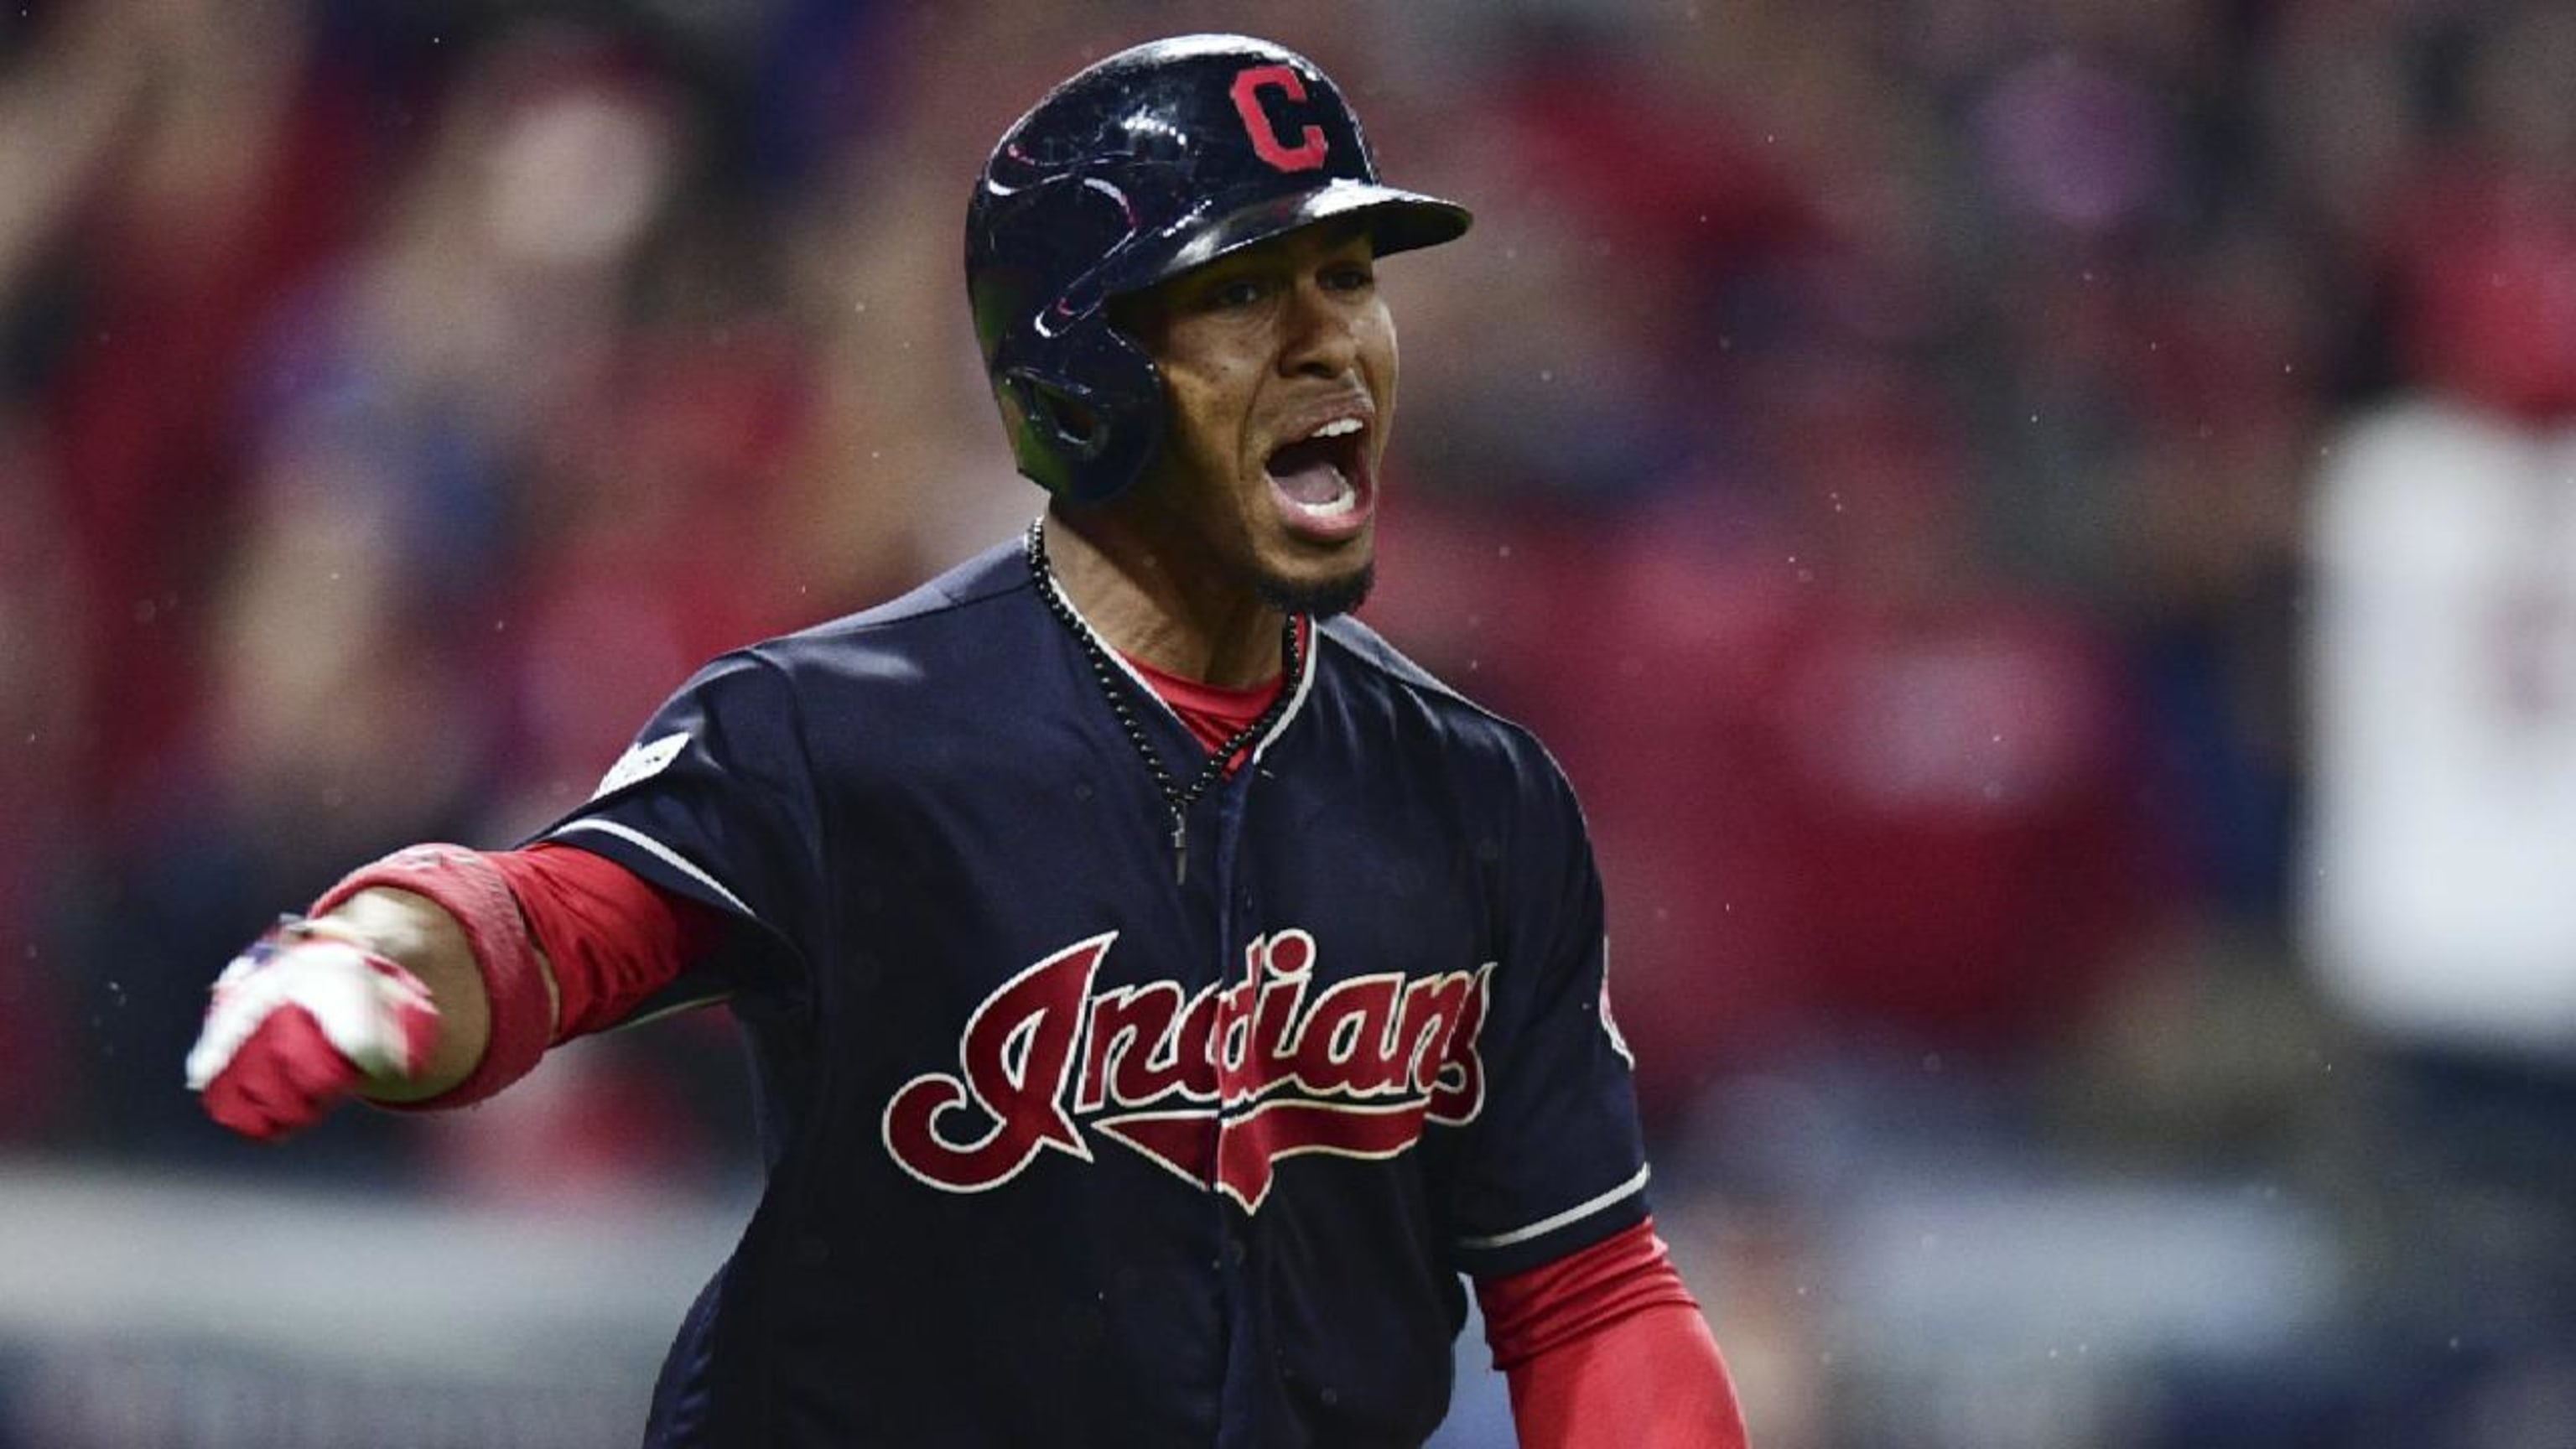 Francisco Lindor lifts Cleveland Indians to series win against New York  Yankees as Tribe triumphs, 4-3 